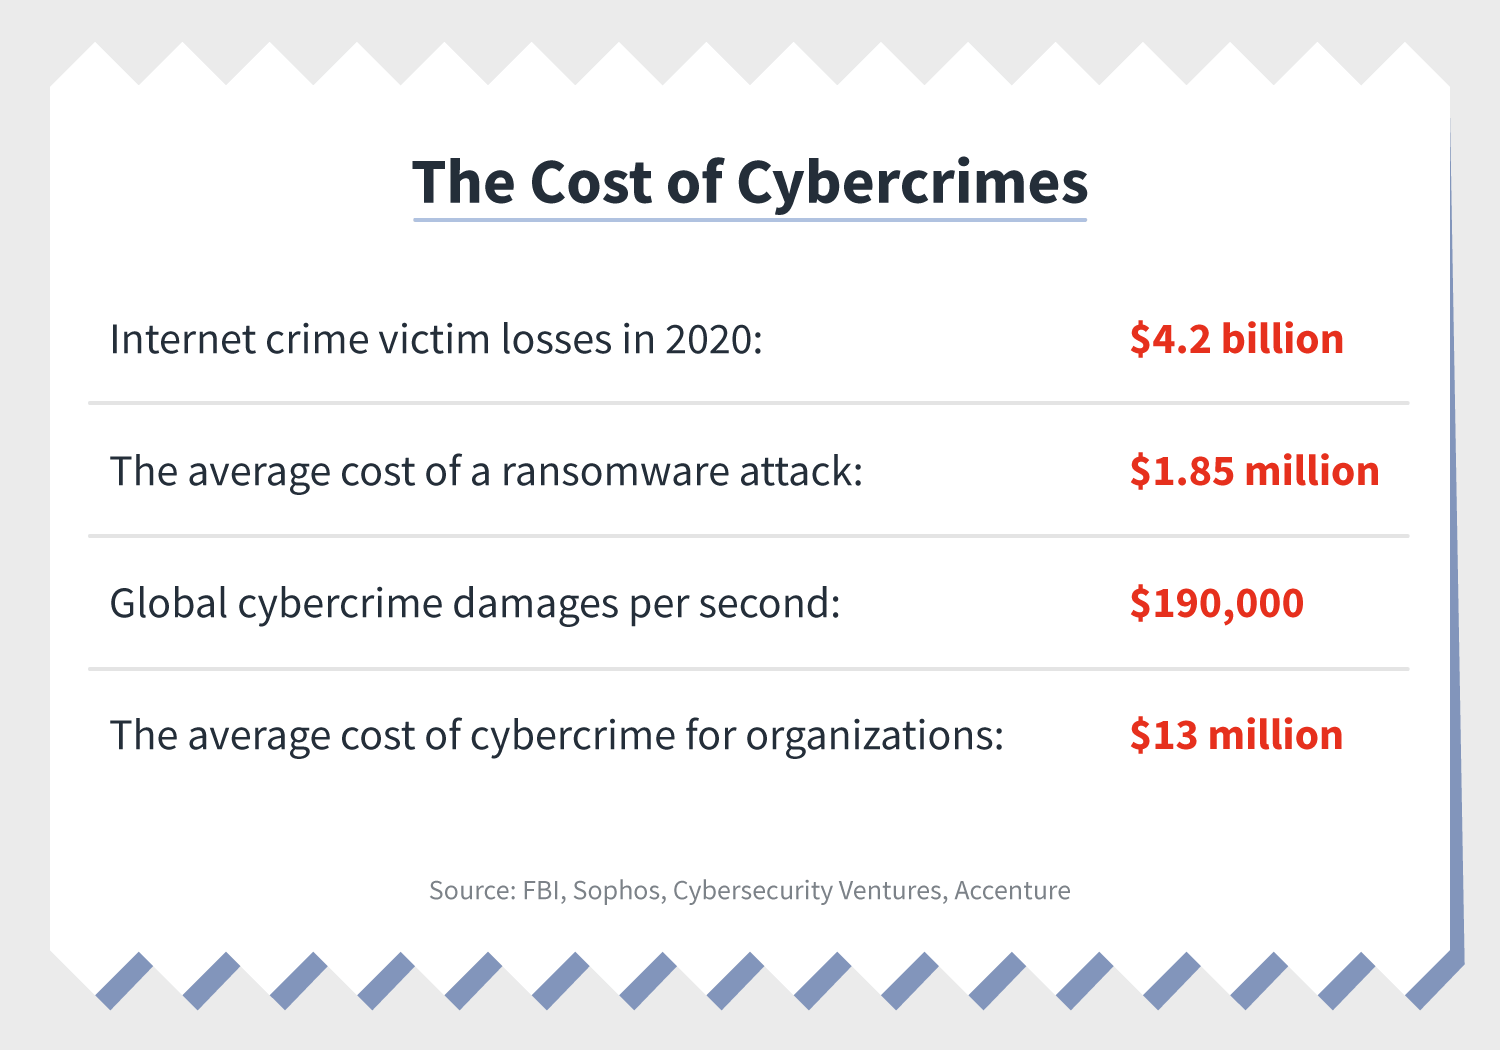 a receipt itemizes some cybersecurity statistics regarding the cost of cybercrimes